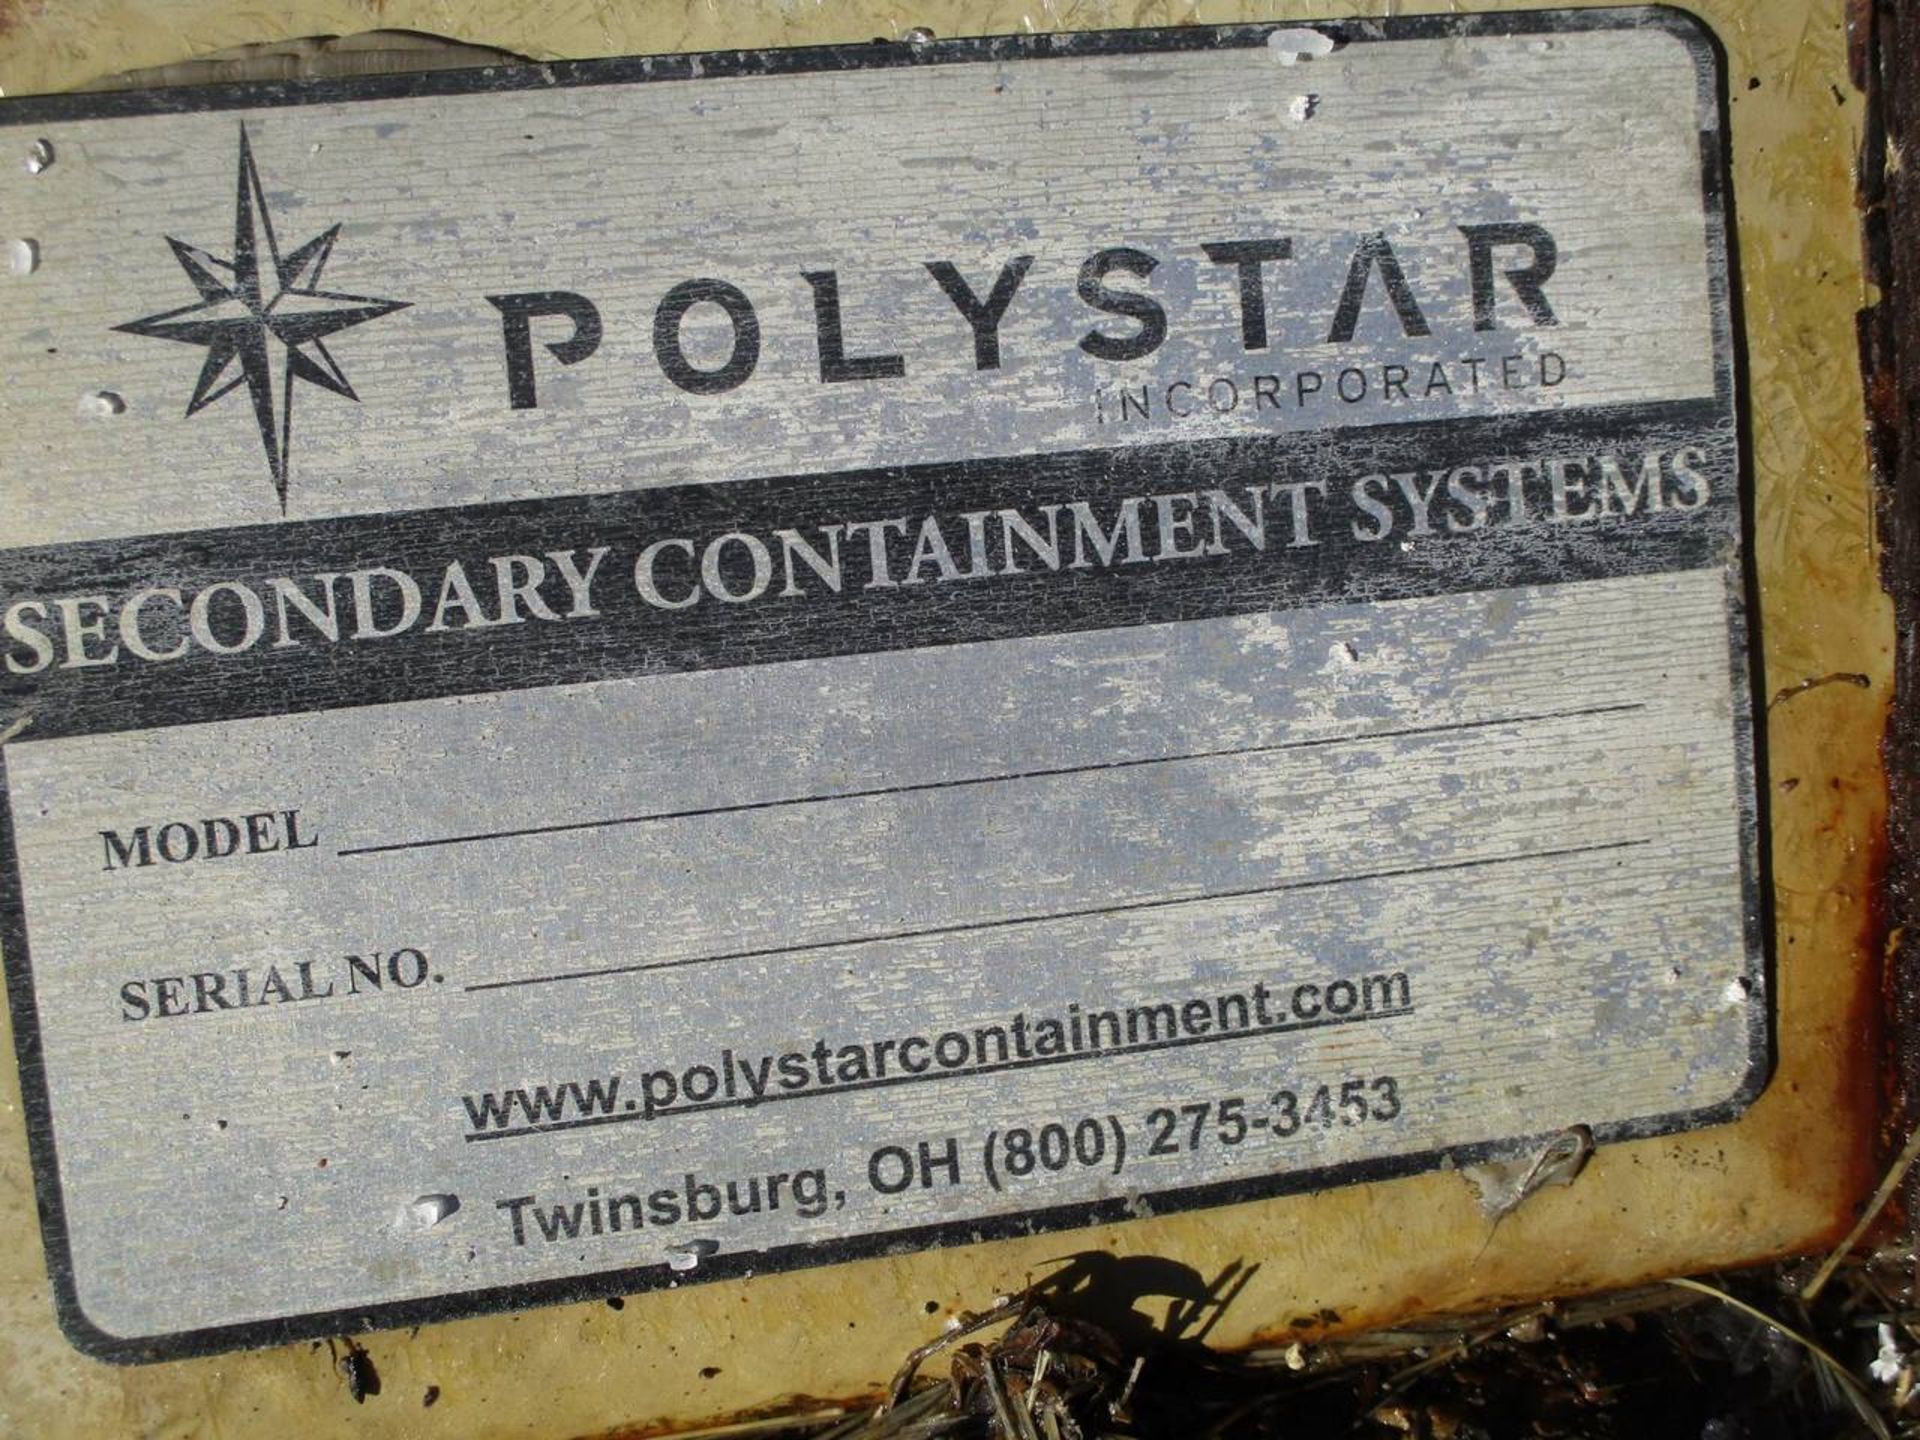 Polystar Secondary Containment Pad - Image 3 of 3